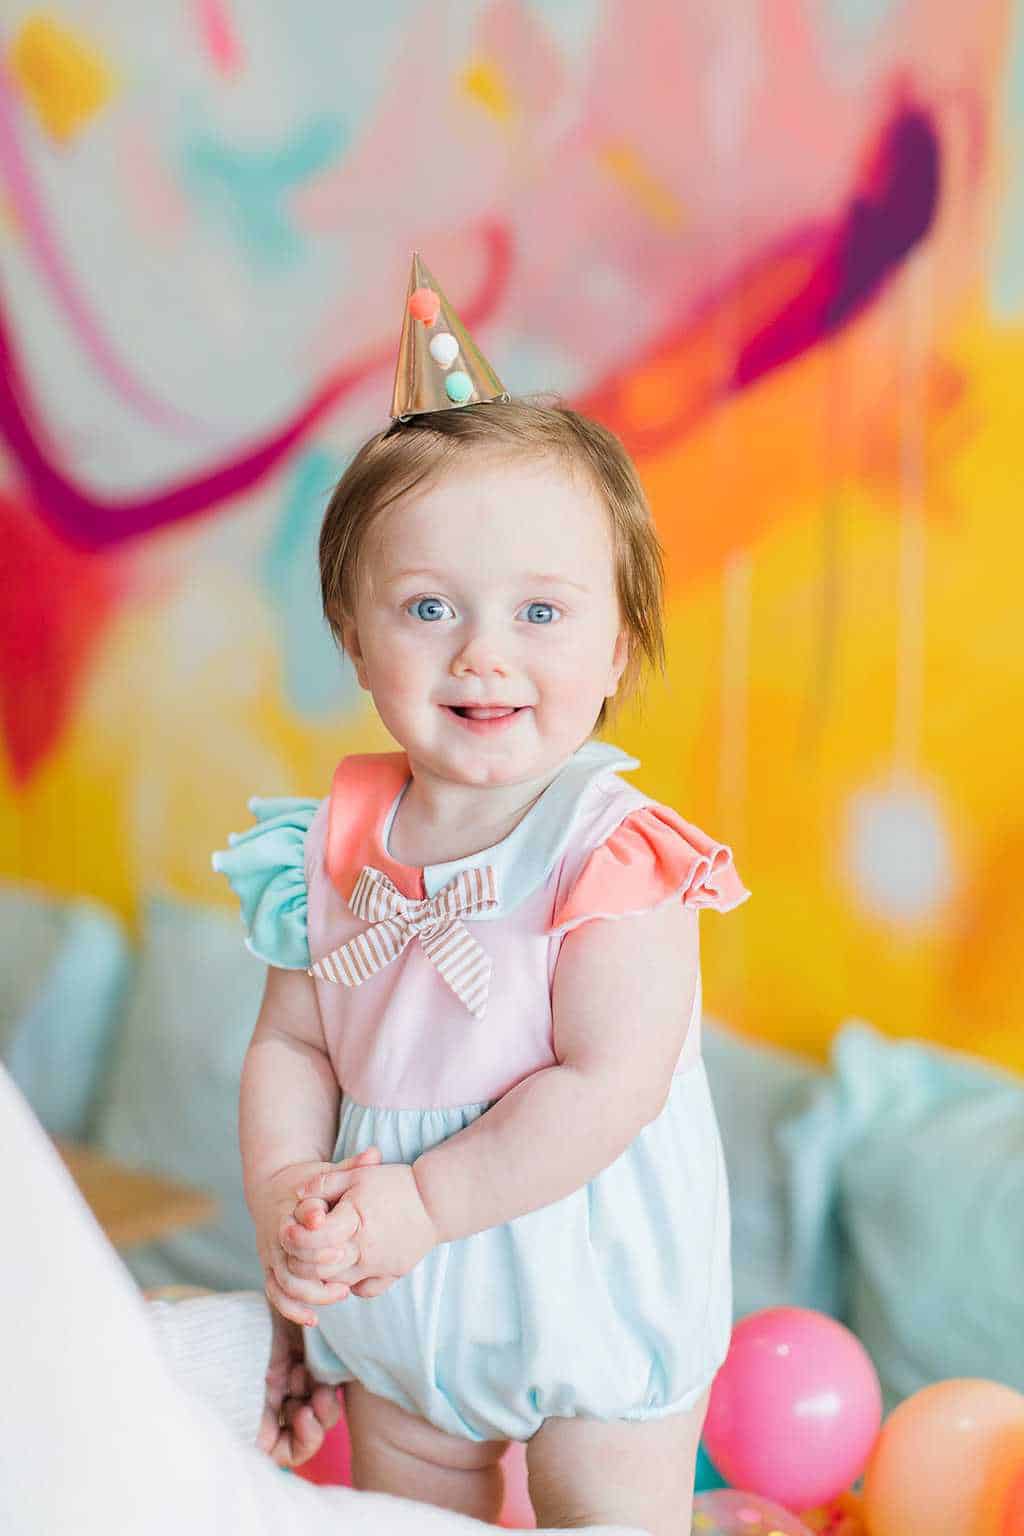 happy birthday to our sweet girl! - Gwen Turns One + Her First Birthday Party Ideas! by top Houston Lifestyle Blogger Ashley Rose of Sugar & Cloth #party #partyideas #firstbirthday #baby #birthday #howto #diy #budget #colorful